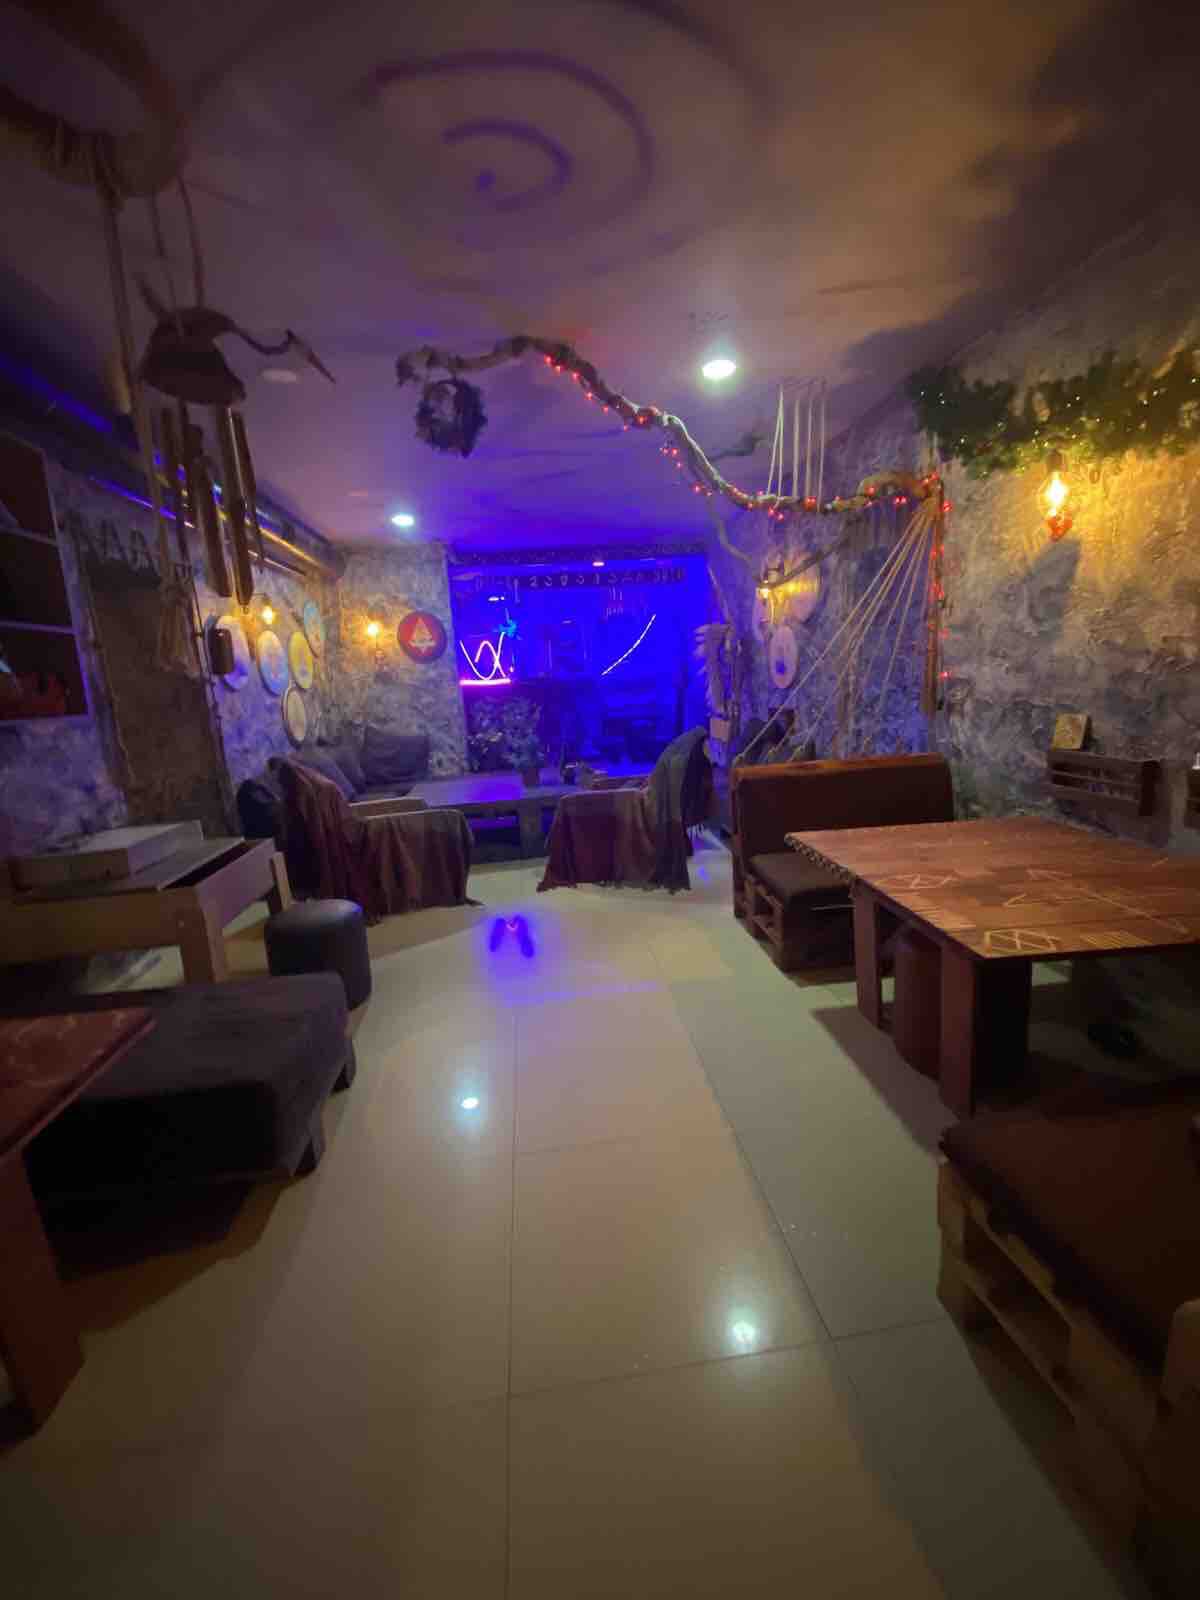 Best place for any kind ofparty for 20 people